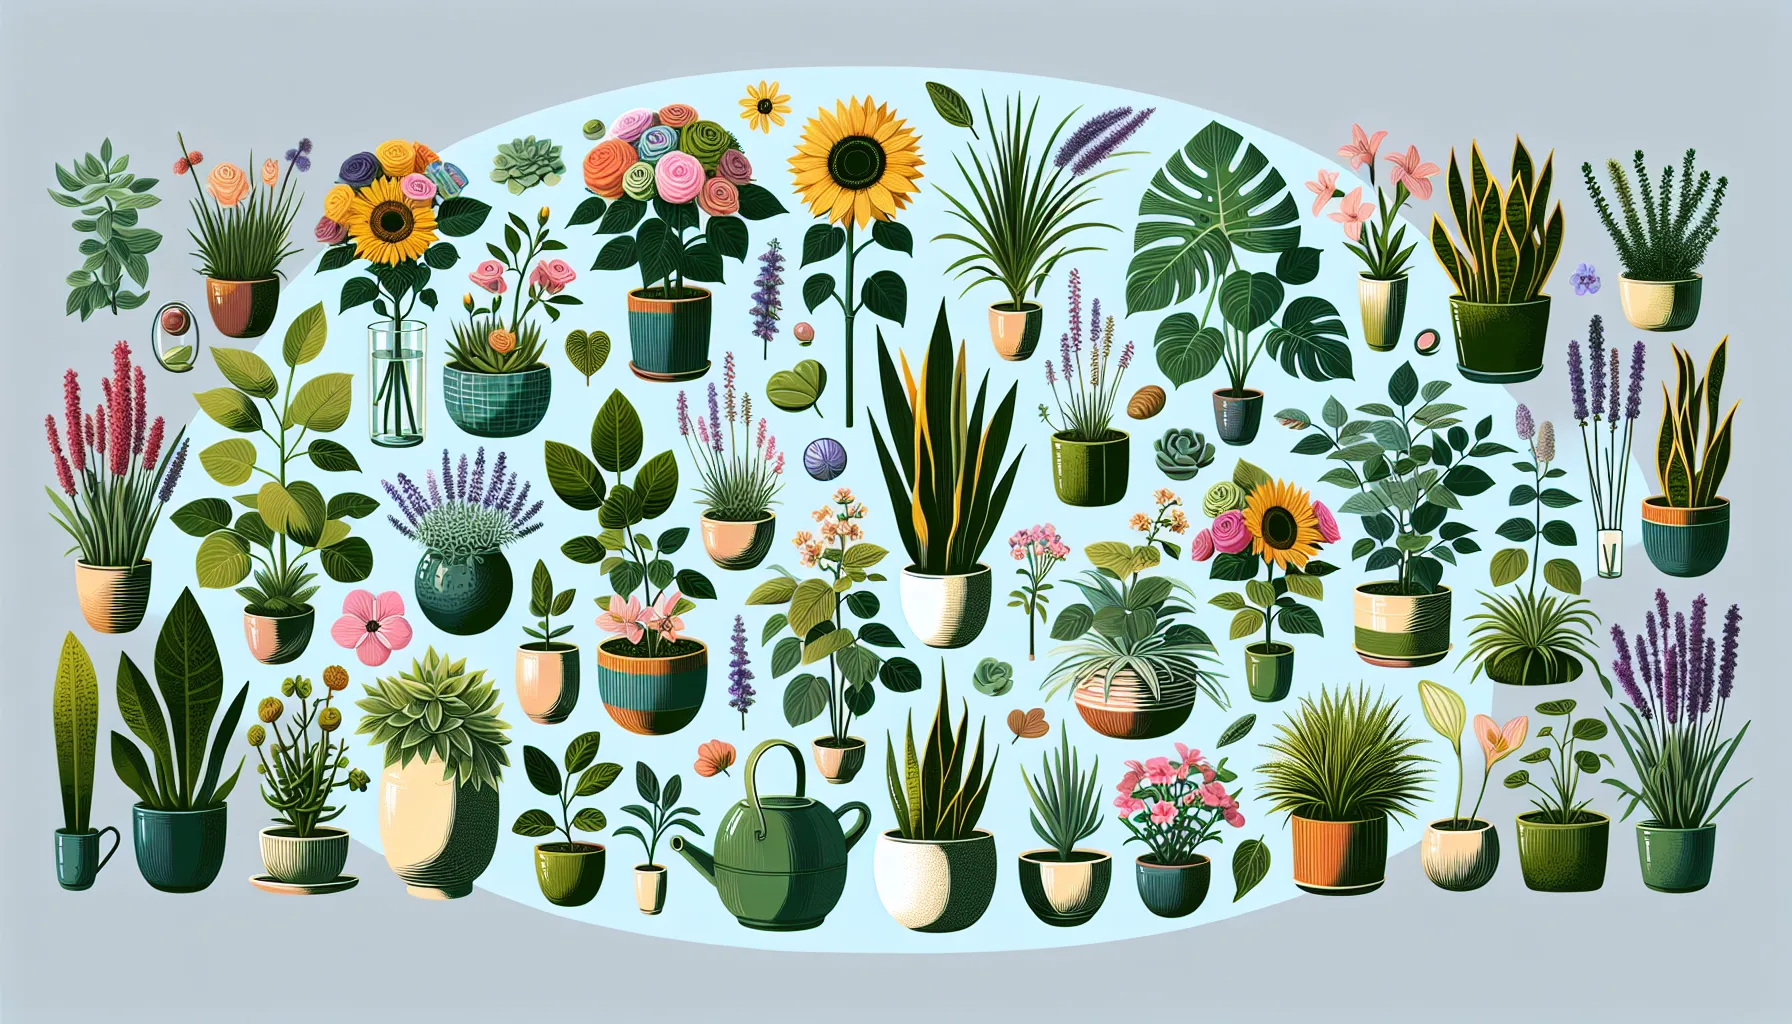 A diverse collection of illustrated flowers and plants in various pots and containers against a light background.